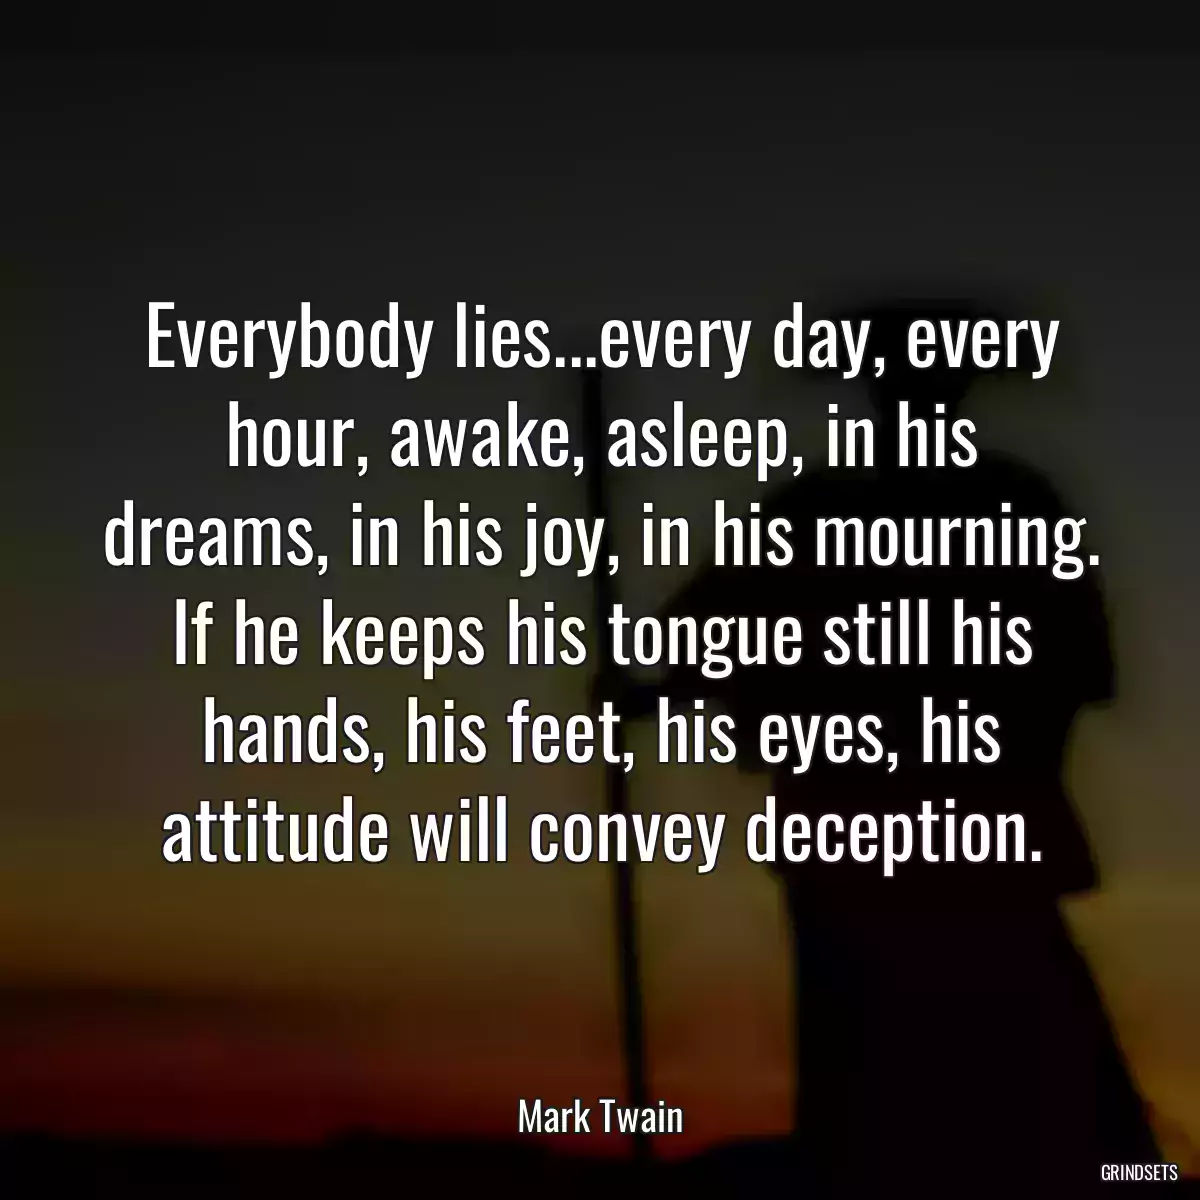 Everybody lies...every day, every hour, awake, asleep, in his dreams, in his joy, in his mourning. If he keeps his tongue still his hands, his feet, his eyes, his attitude will convey deception.